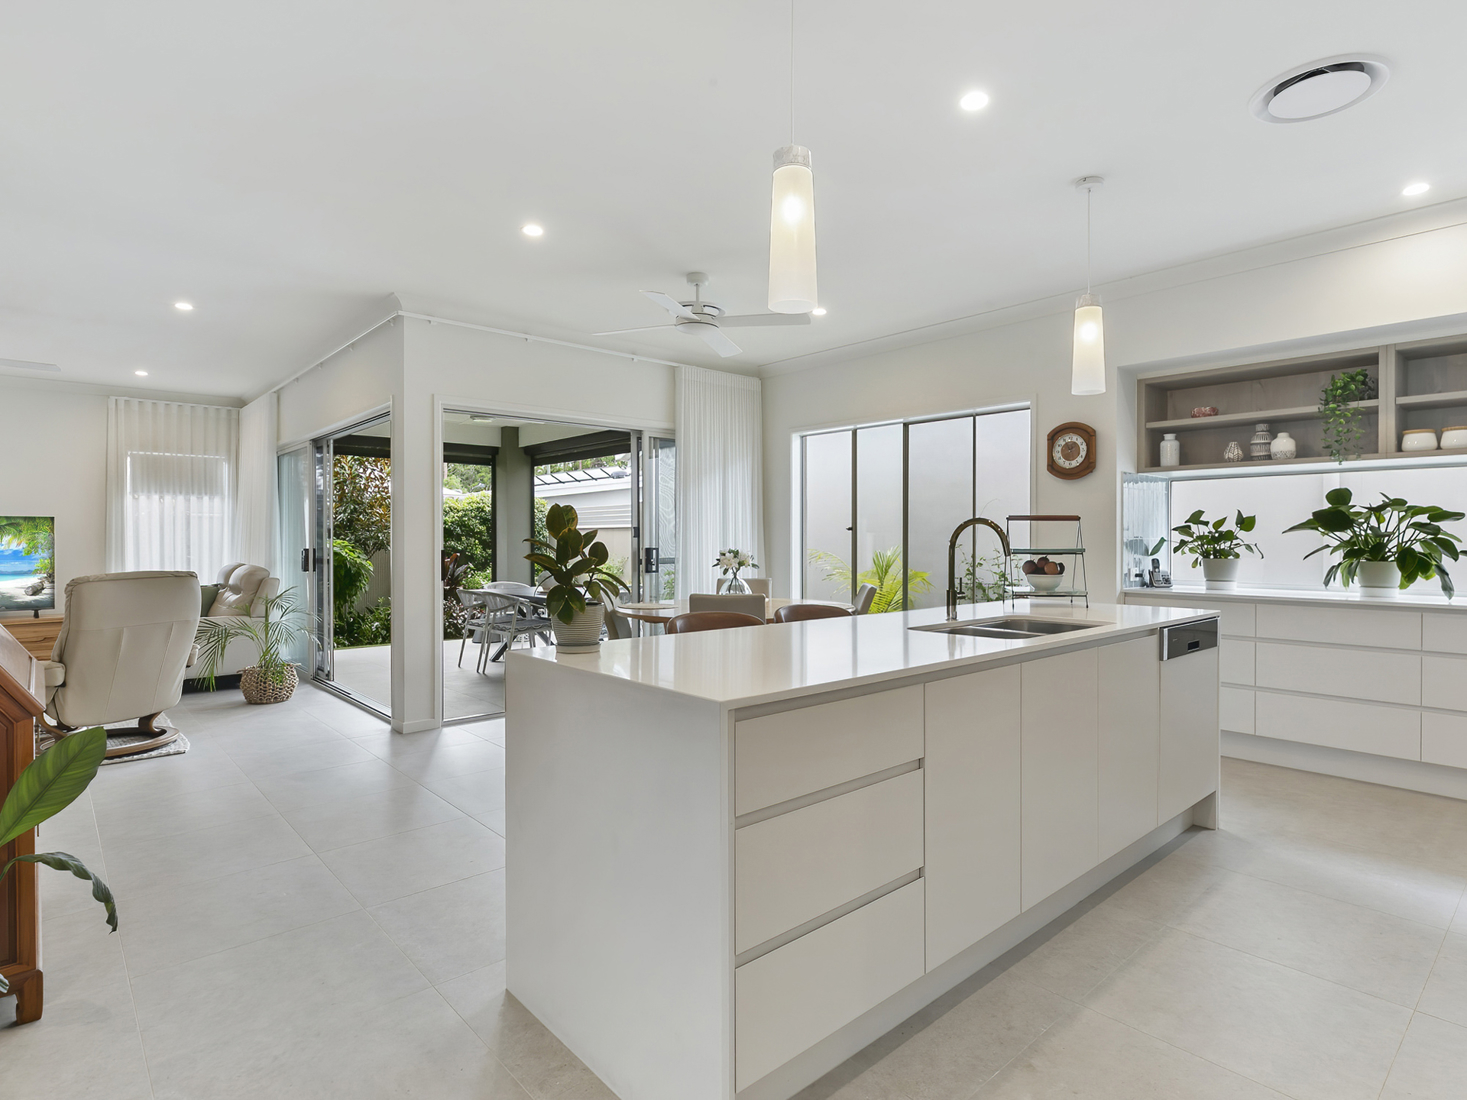 white kitchen interior with island bench overlooking indoor dining space and exterior rear patio